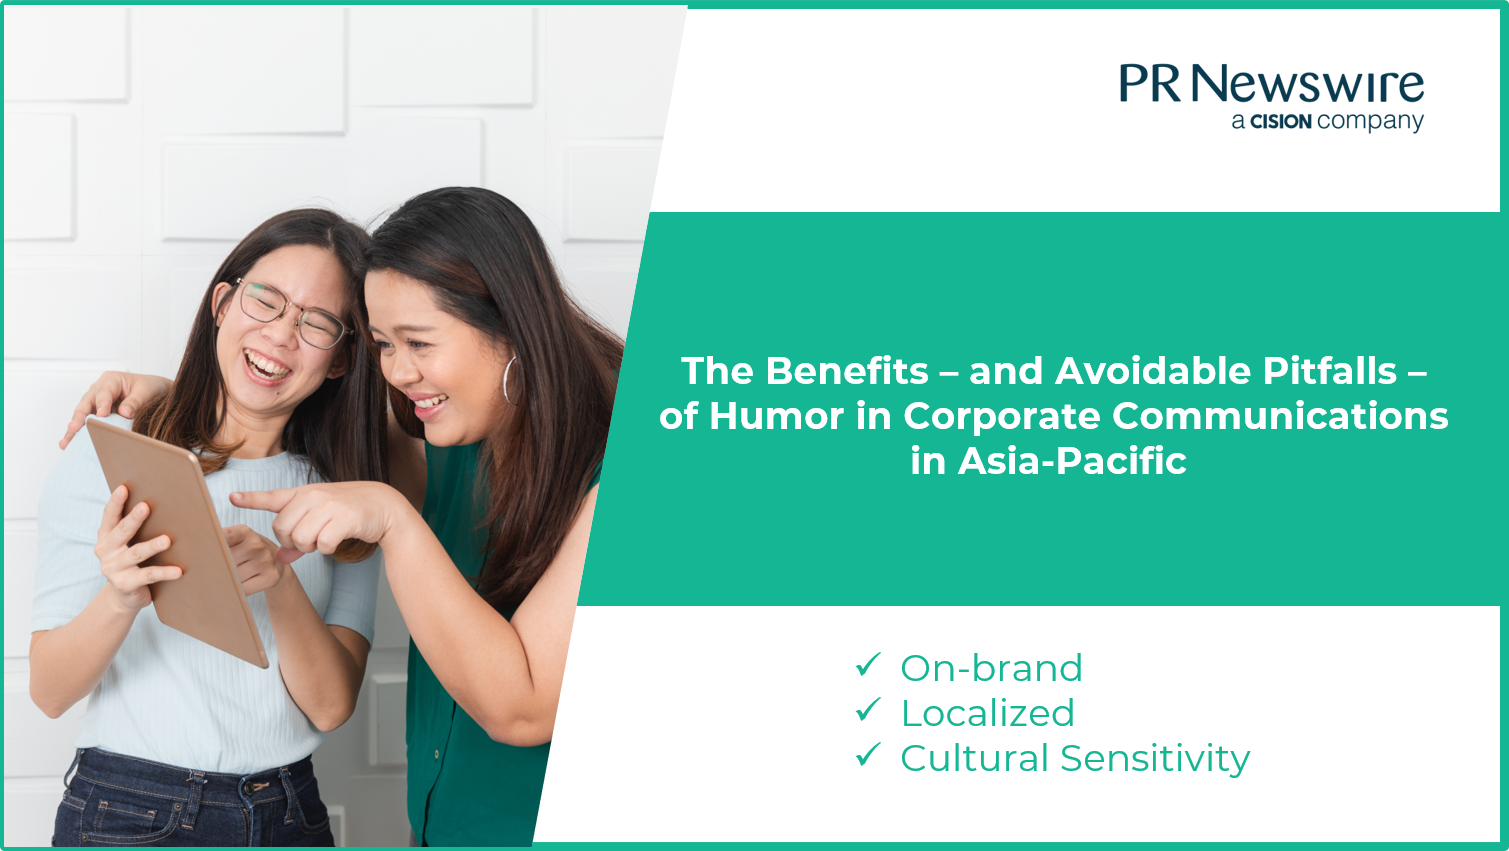 The Benefits - and Avoidable Pitfalls - of Humor in Corporate Communications in Asia-Pacific 